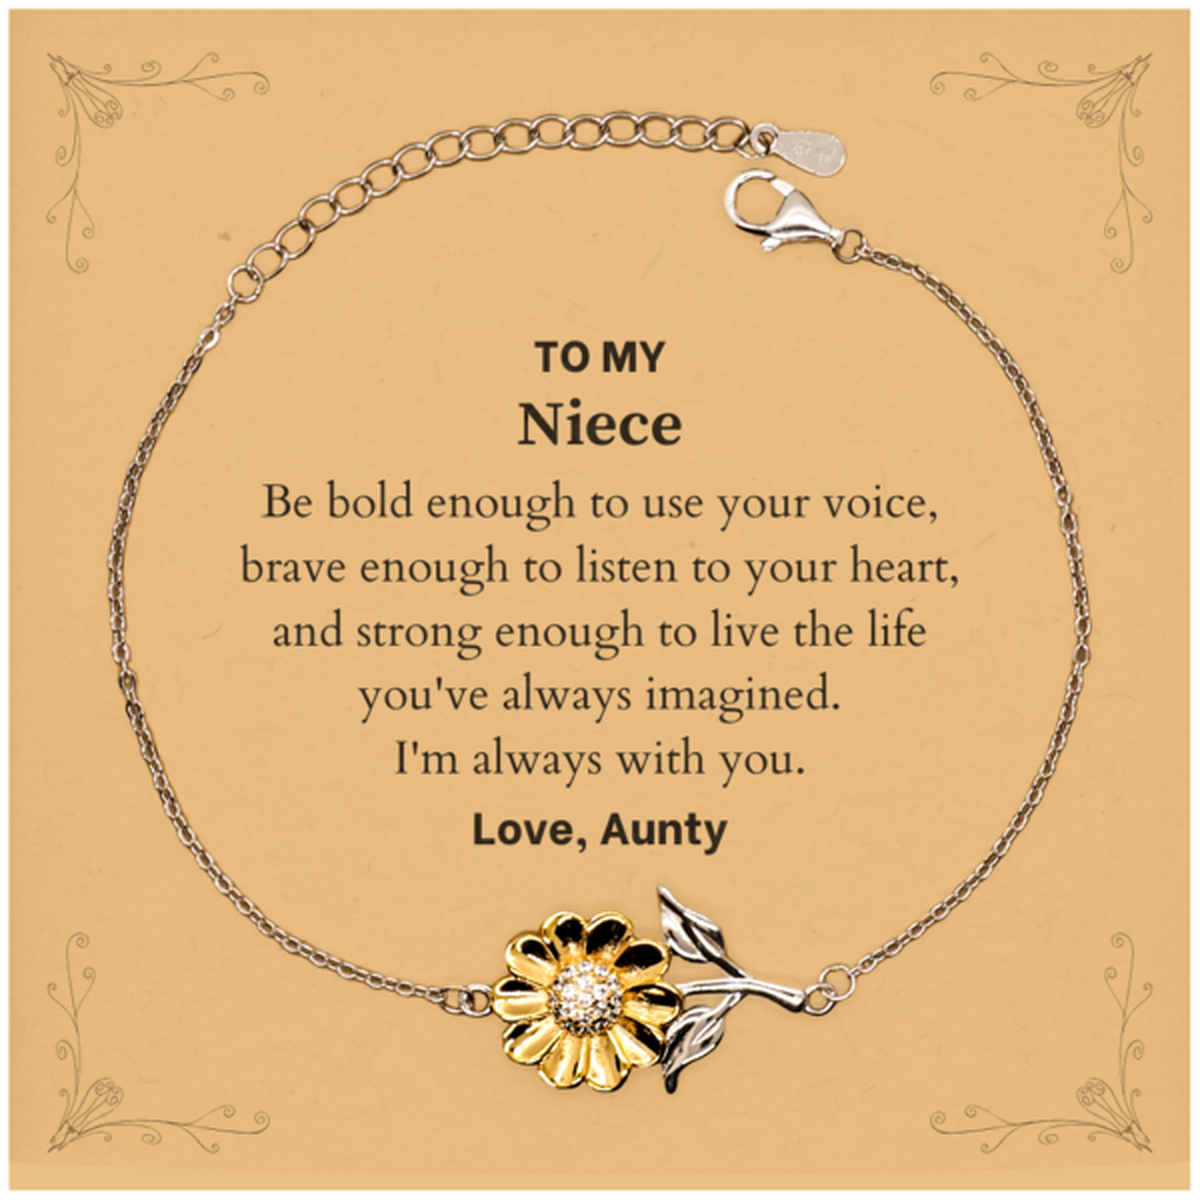 Keepsake Niece Sunflower Bracelet Gift Idea Graduation Christmas Birthday Niece from Aunty, Niece Be bold enough to use your voice, brave enough to listen to your heart. Love, Aunty